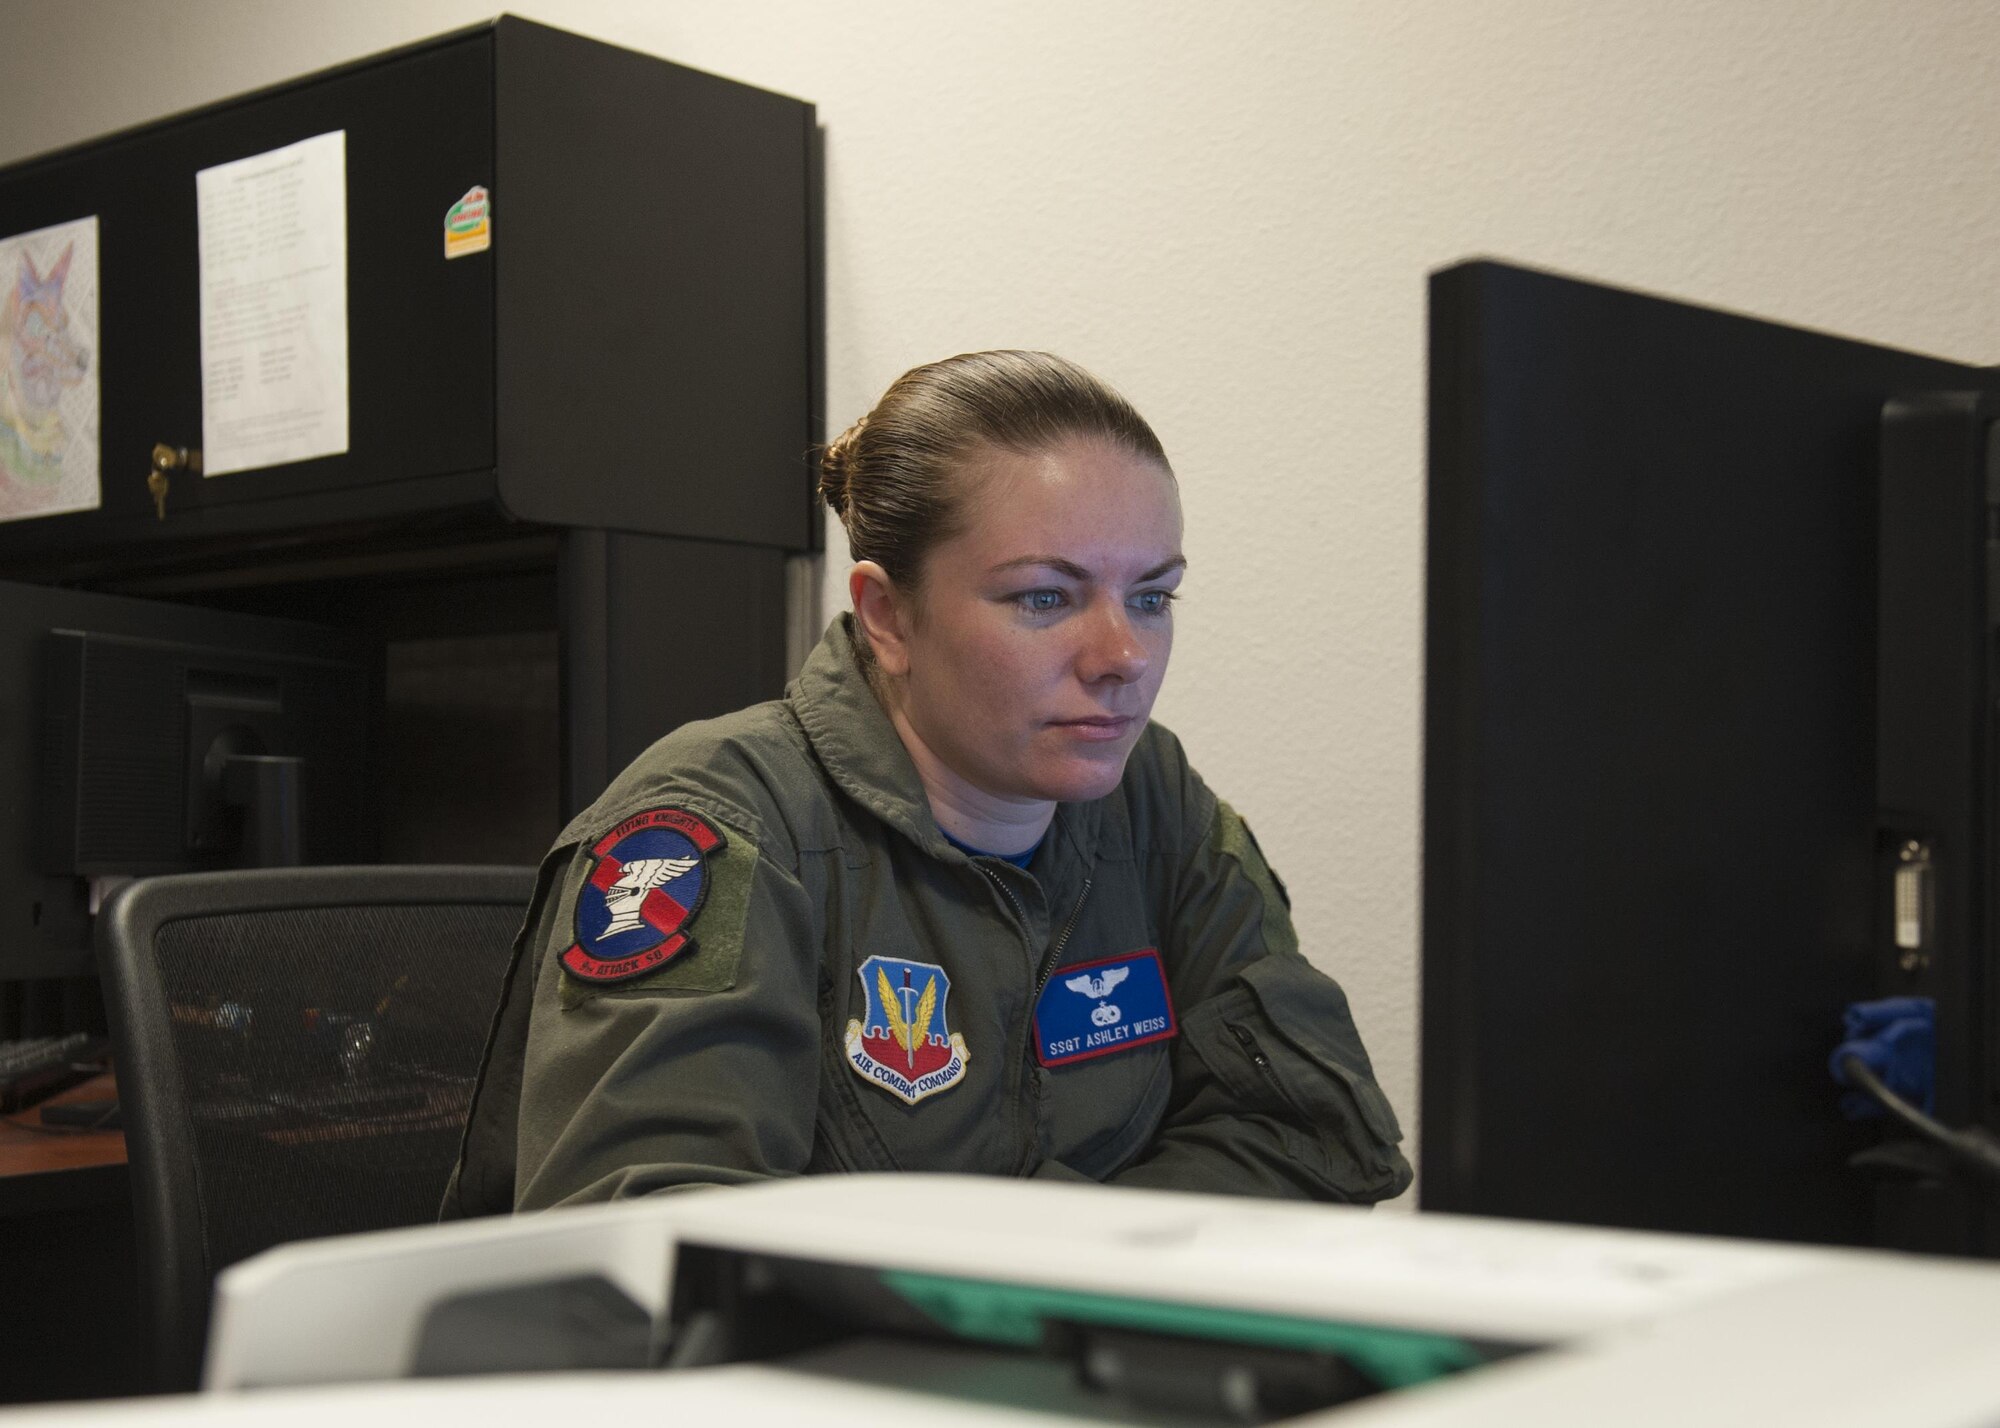 Staff Sgt. Ashley Weiss, a sensor operator instructor assigned to the 9th Attack Squadron, reviews her meeting schedule at Holloman Air Force Base, N.M. March 10, 2017. Weiss was an aircraft maintainer prior to being picked up for the sensor operator instructor position.